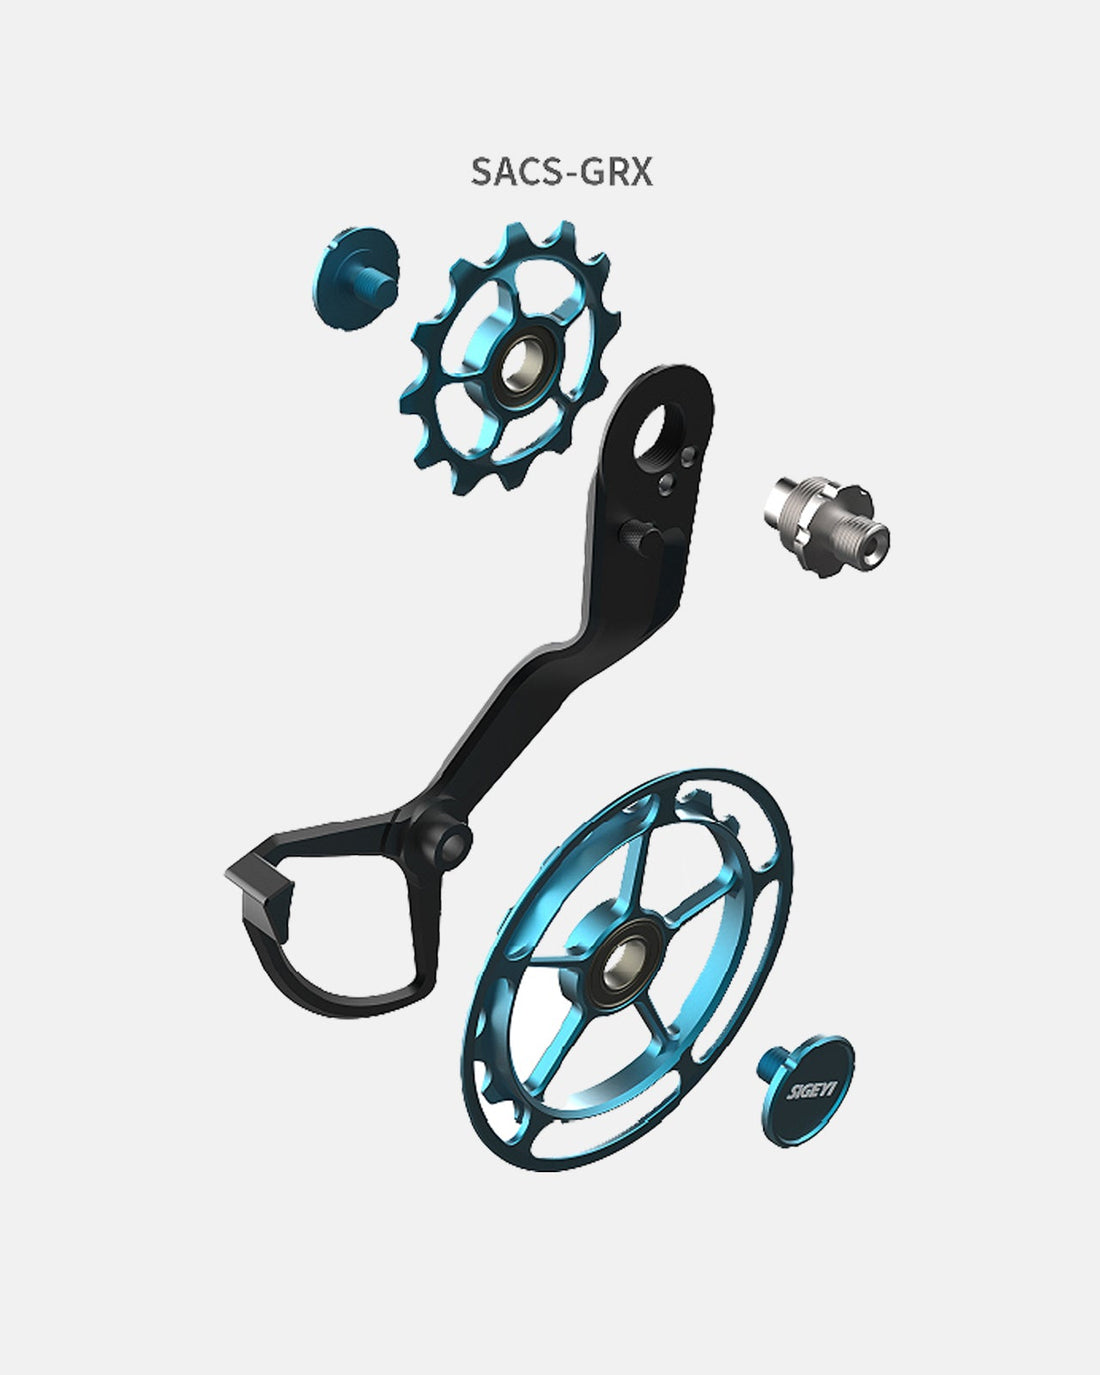 SIGEYI &quot;SACS&quot; Single Arm Cage System - GRX - Sigeyi